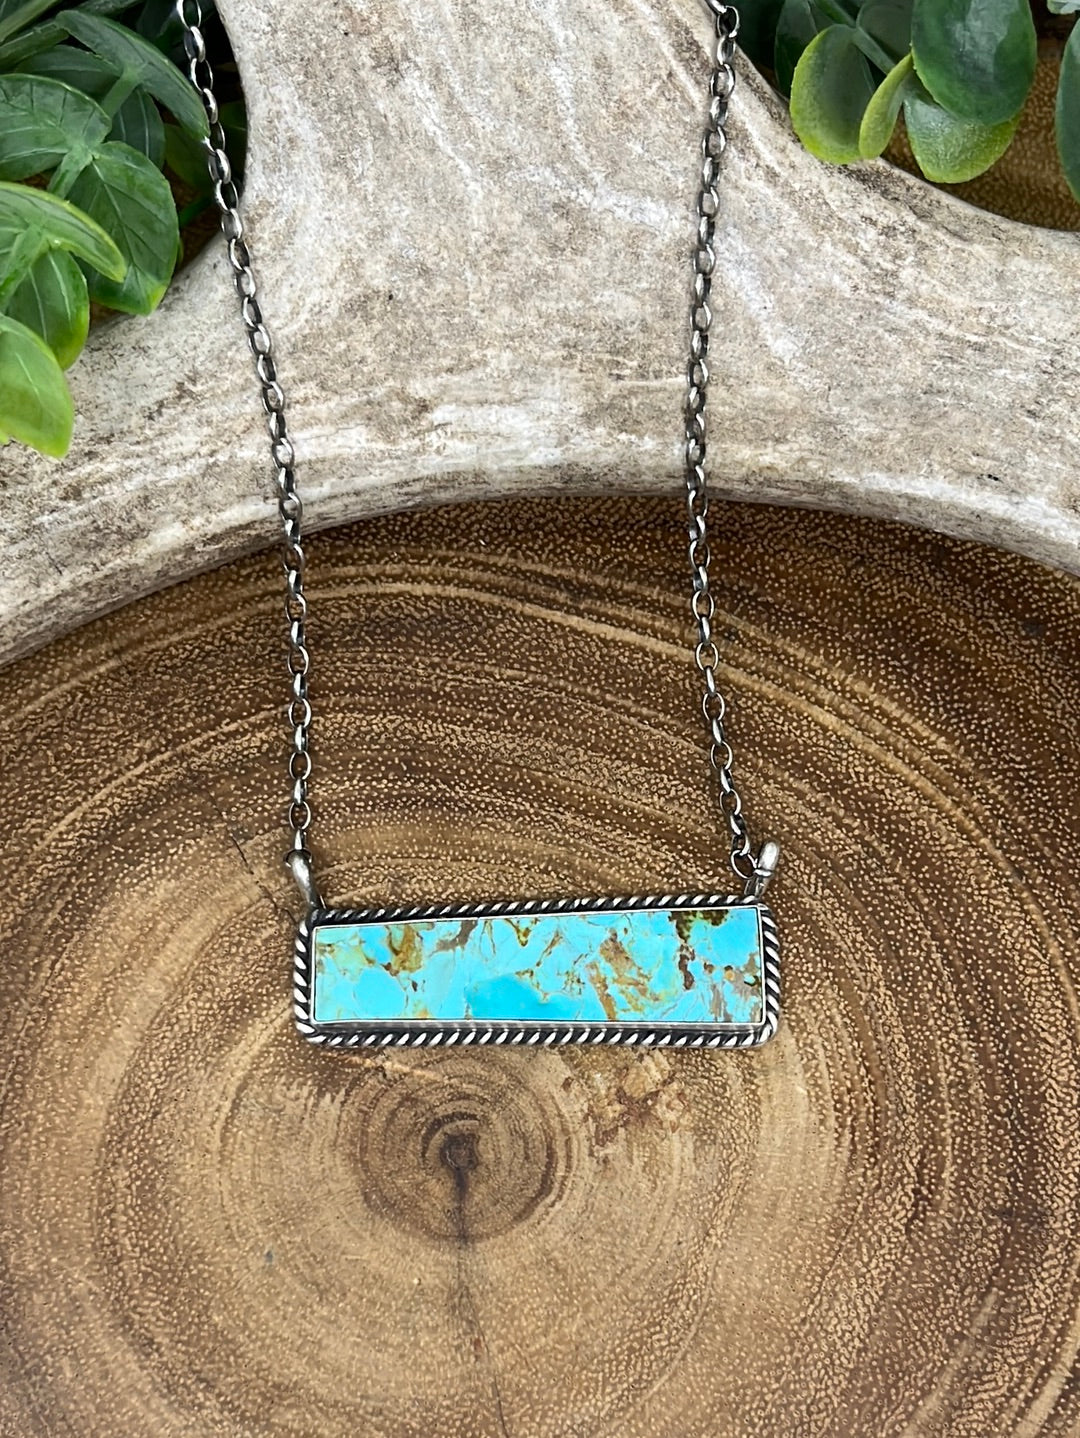 Shasta Roped Sterling Kingman Turquoise Bar Necklace